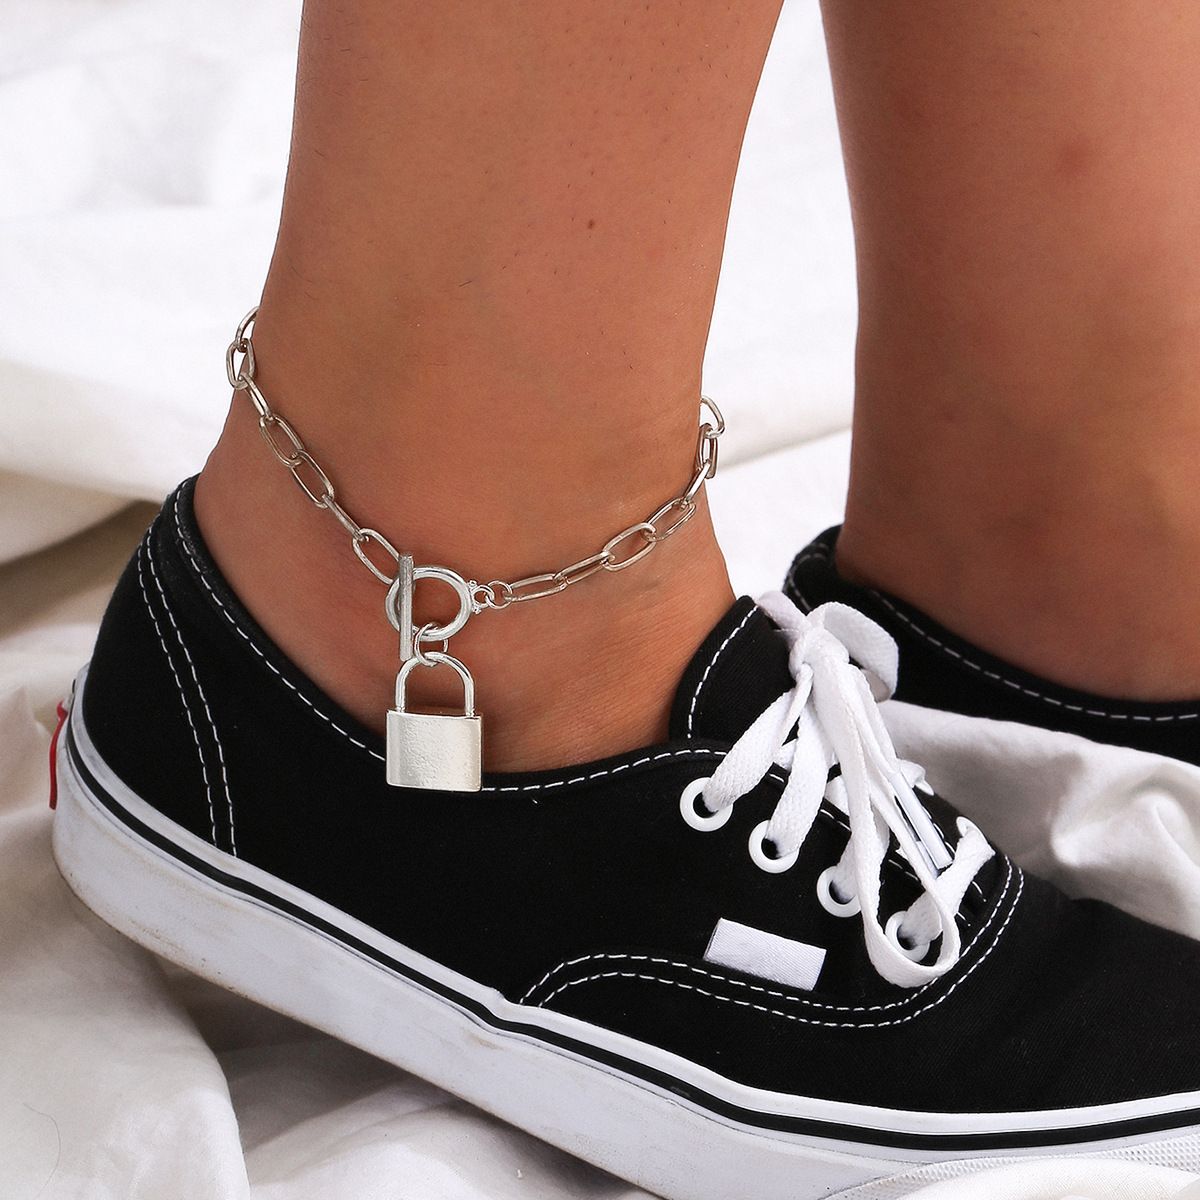 2pcs Fashion Charm Womens Glossy Star Bead Chain Anklet Ankle Bracelet Jewelry